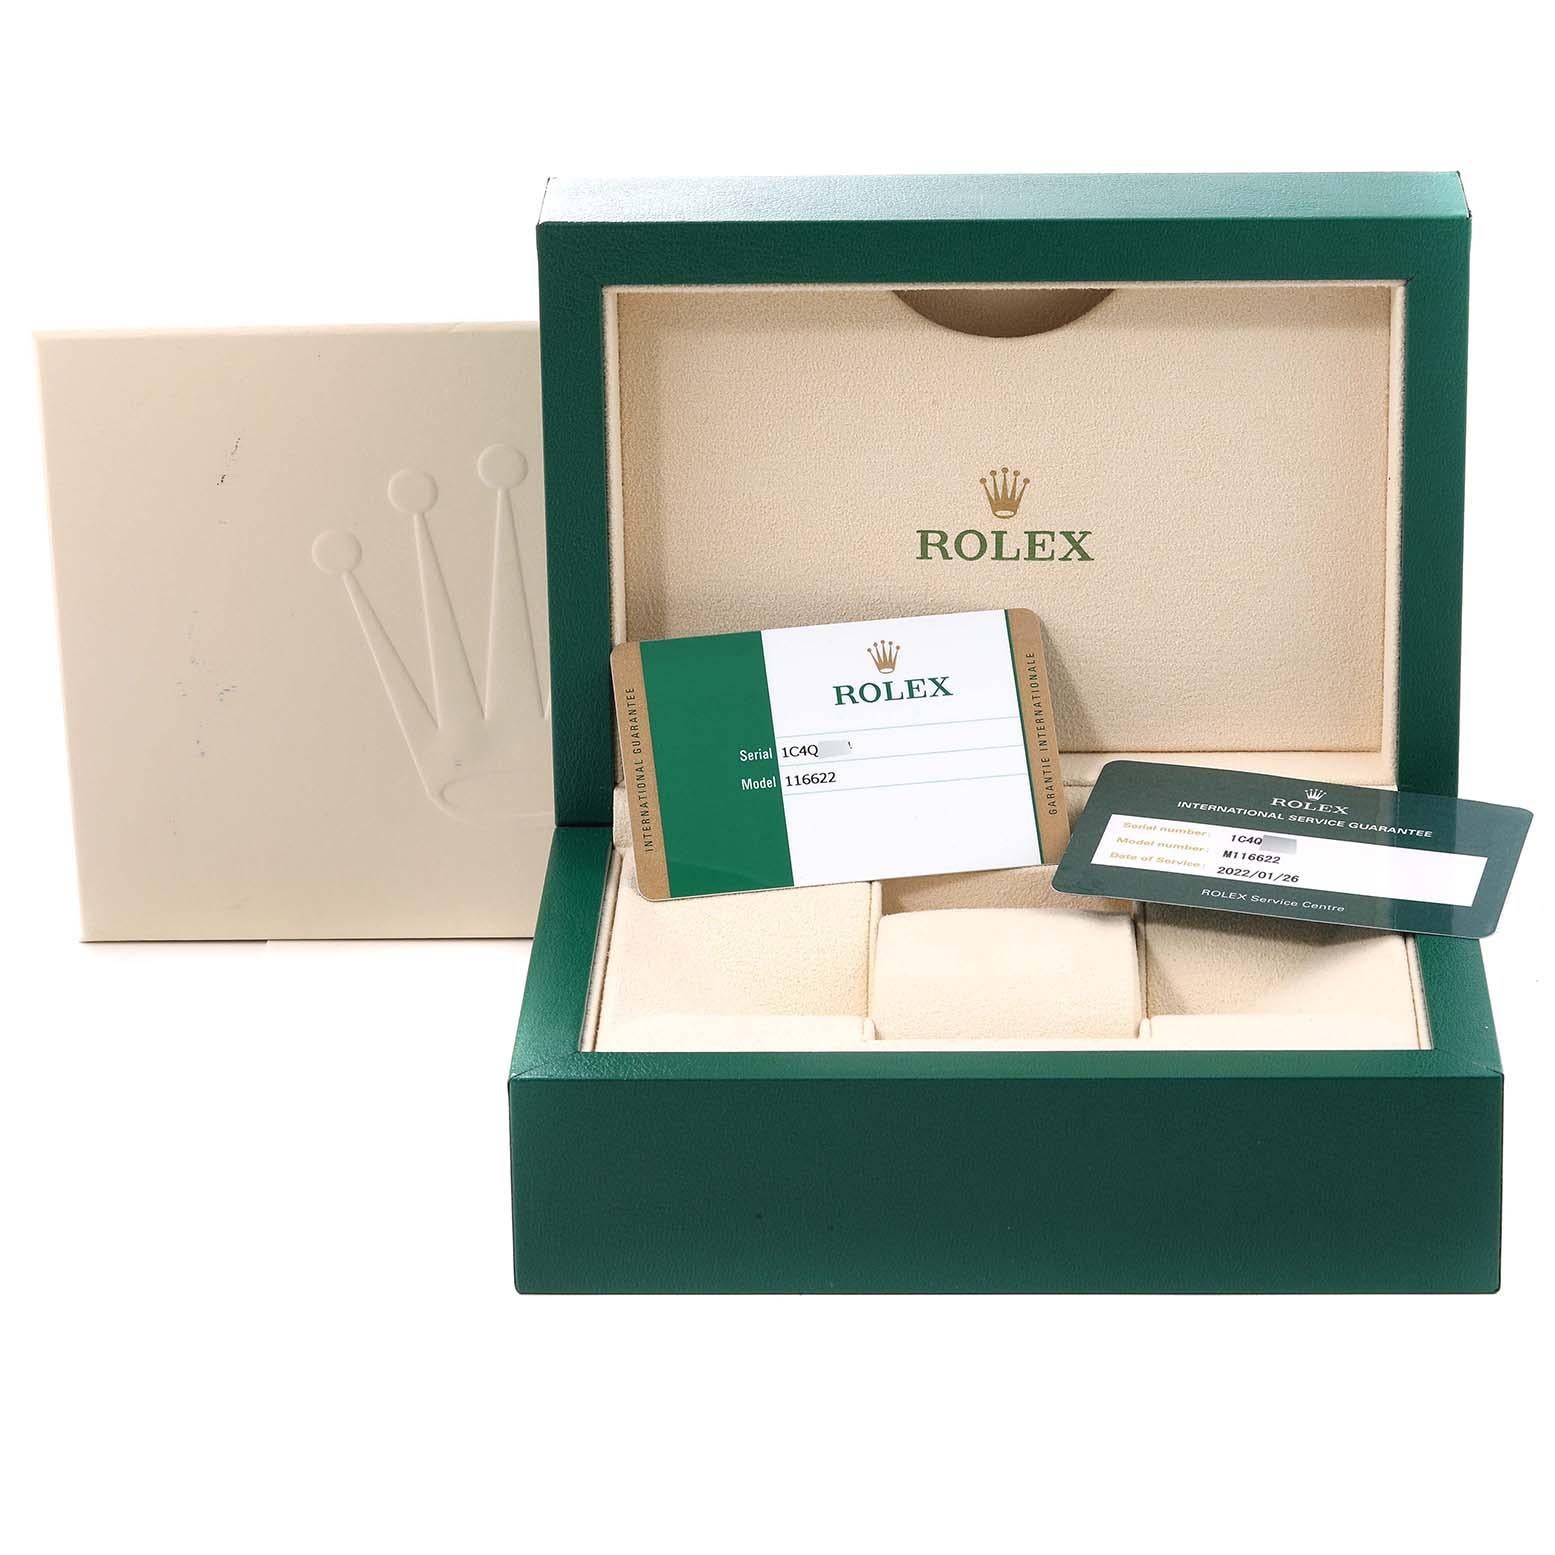 Rolex Yachtmaster Platinum Dial Steel Mens Watch 116622 Box Card 5